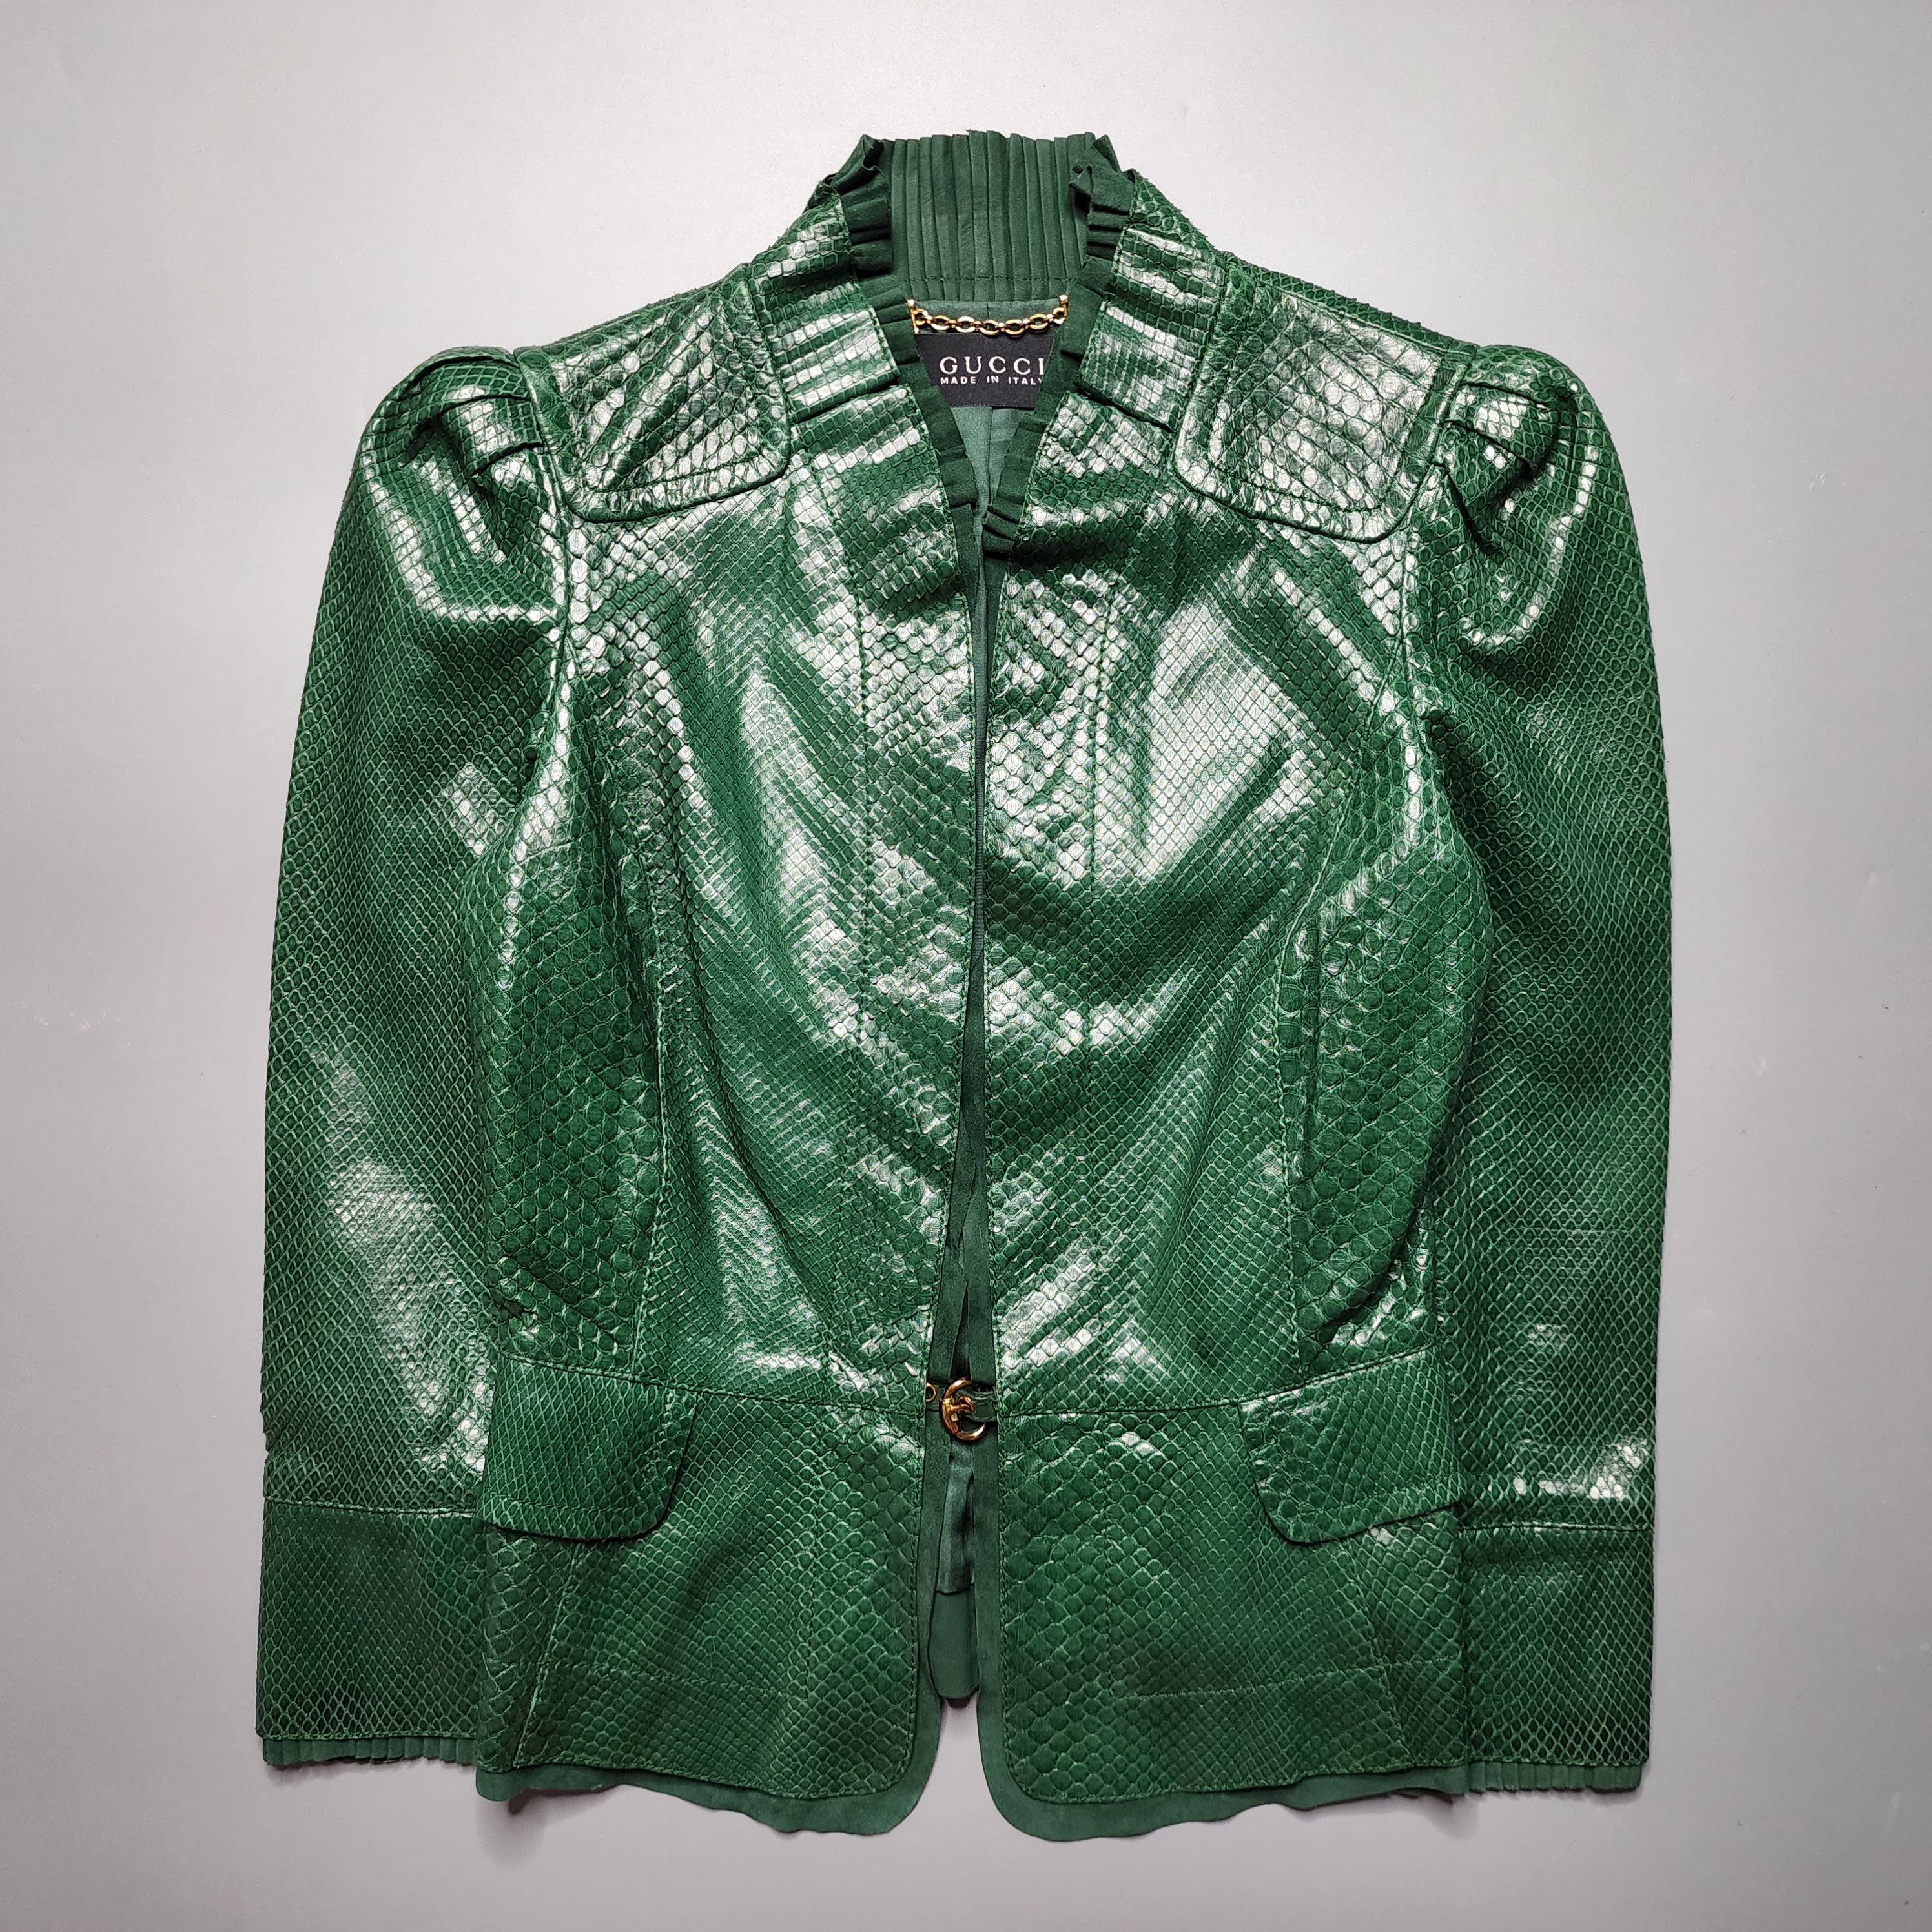 Gucci - SS06 Runway Phyton Leather Jacket - 2